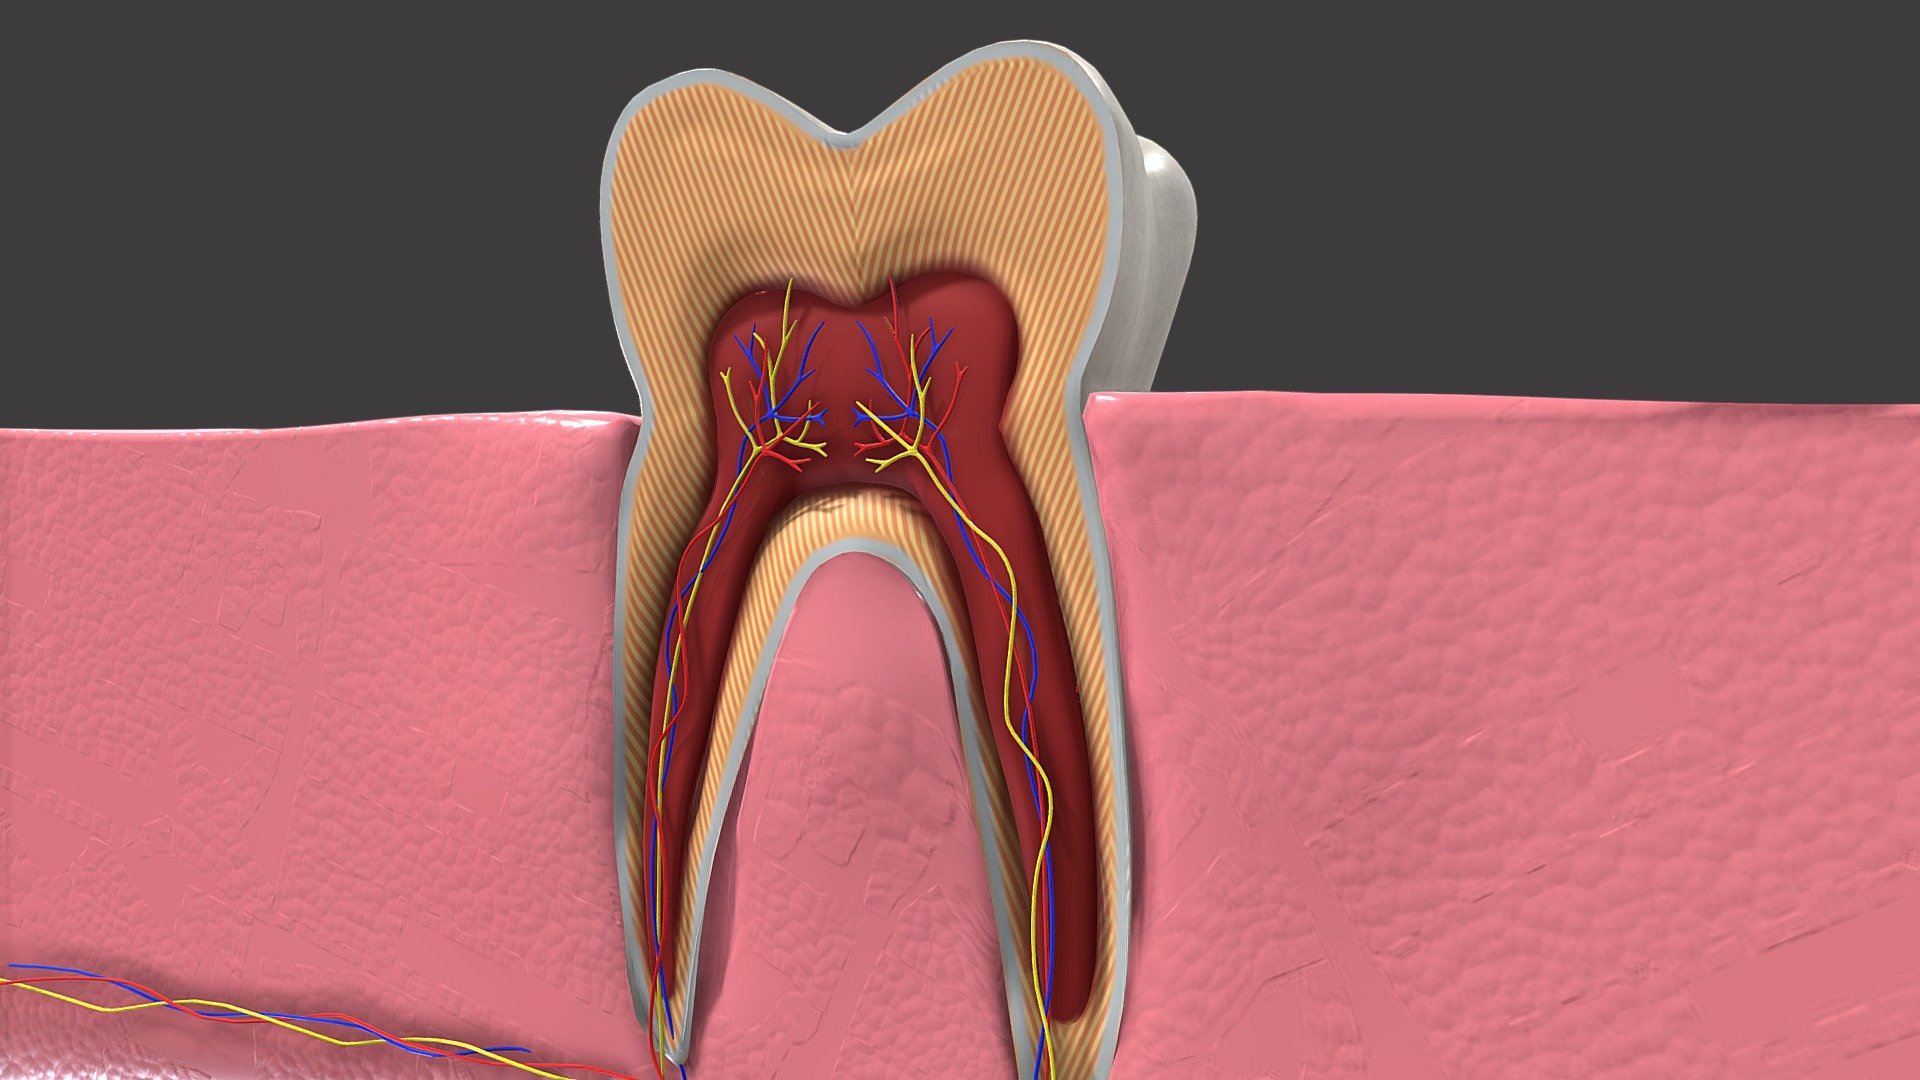 A detailed model perfect for educational training and dental procedure showcases.
The tooth gums and blood vessels are individual objects so you can hide sections of the model for your demonstration 3d model